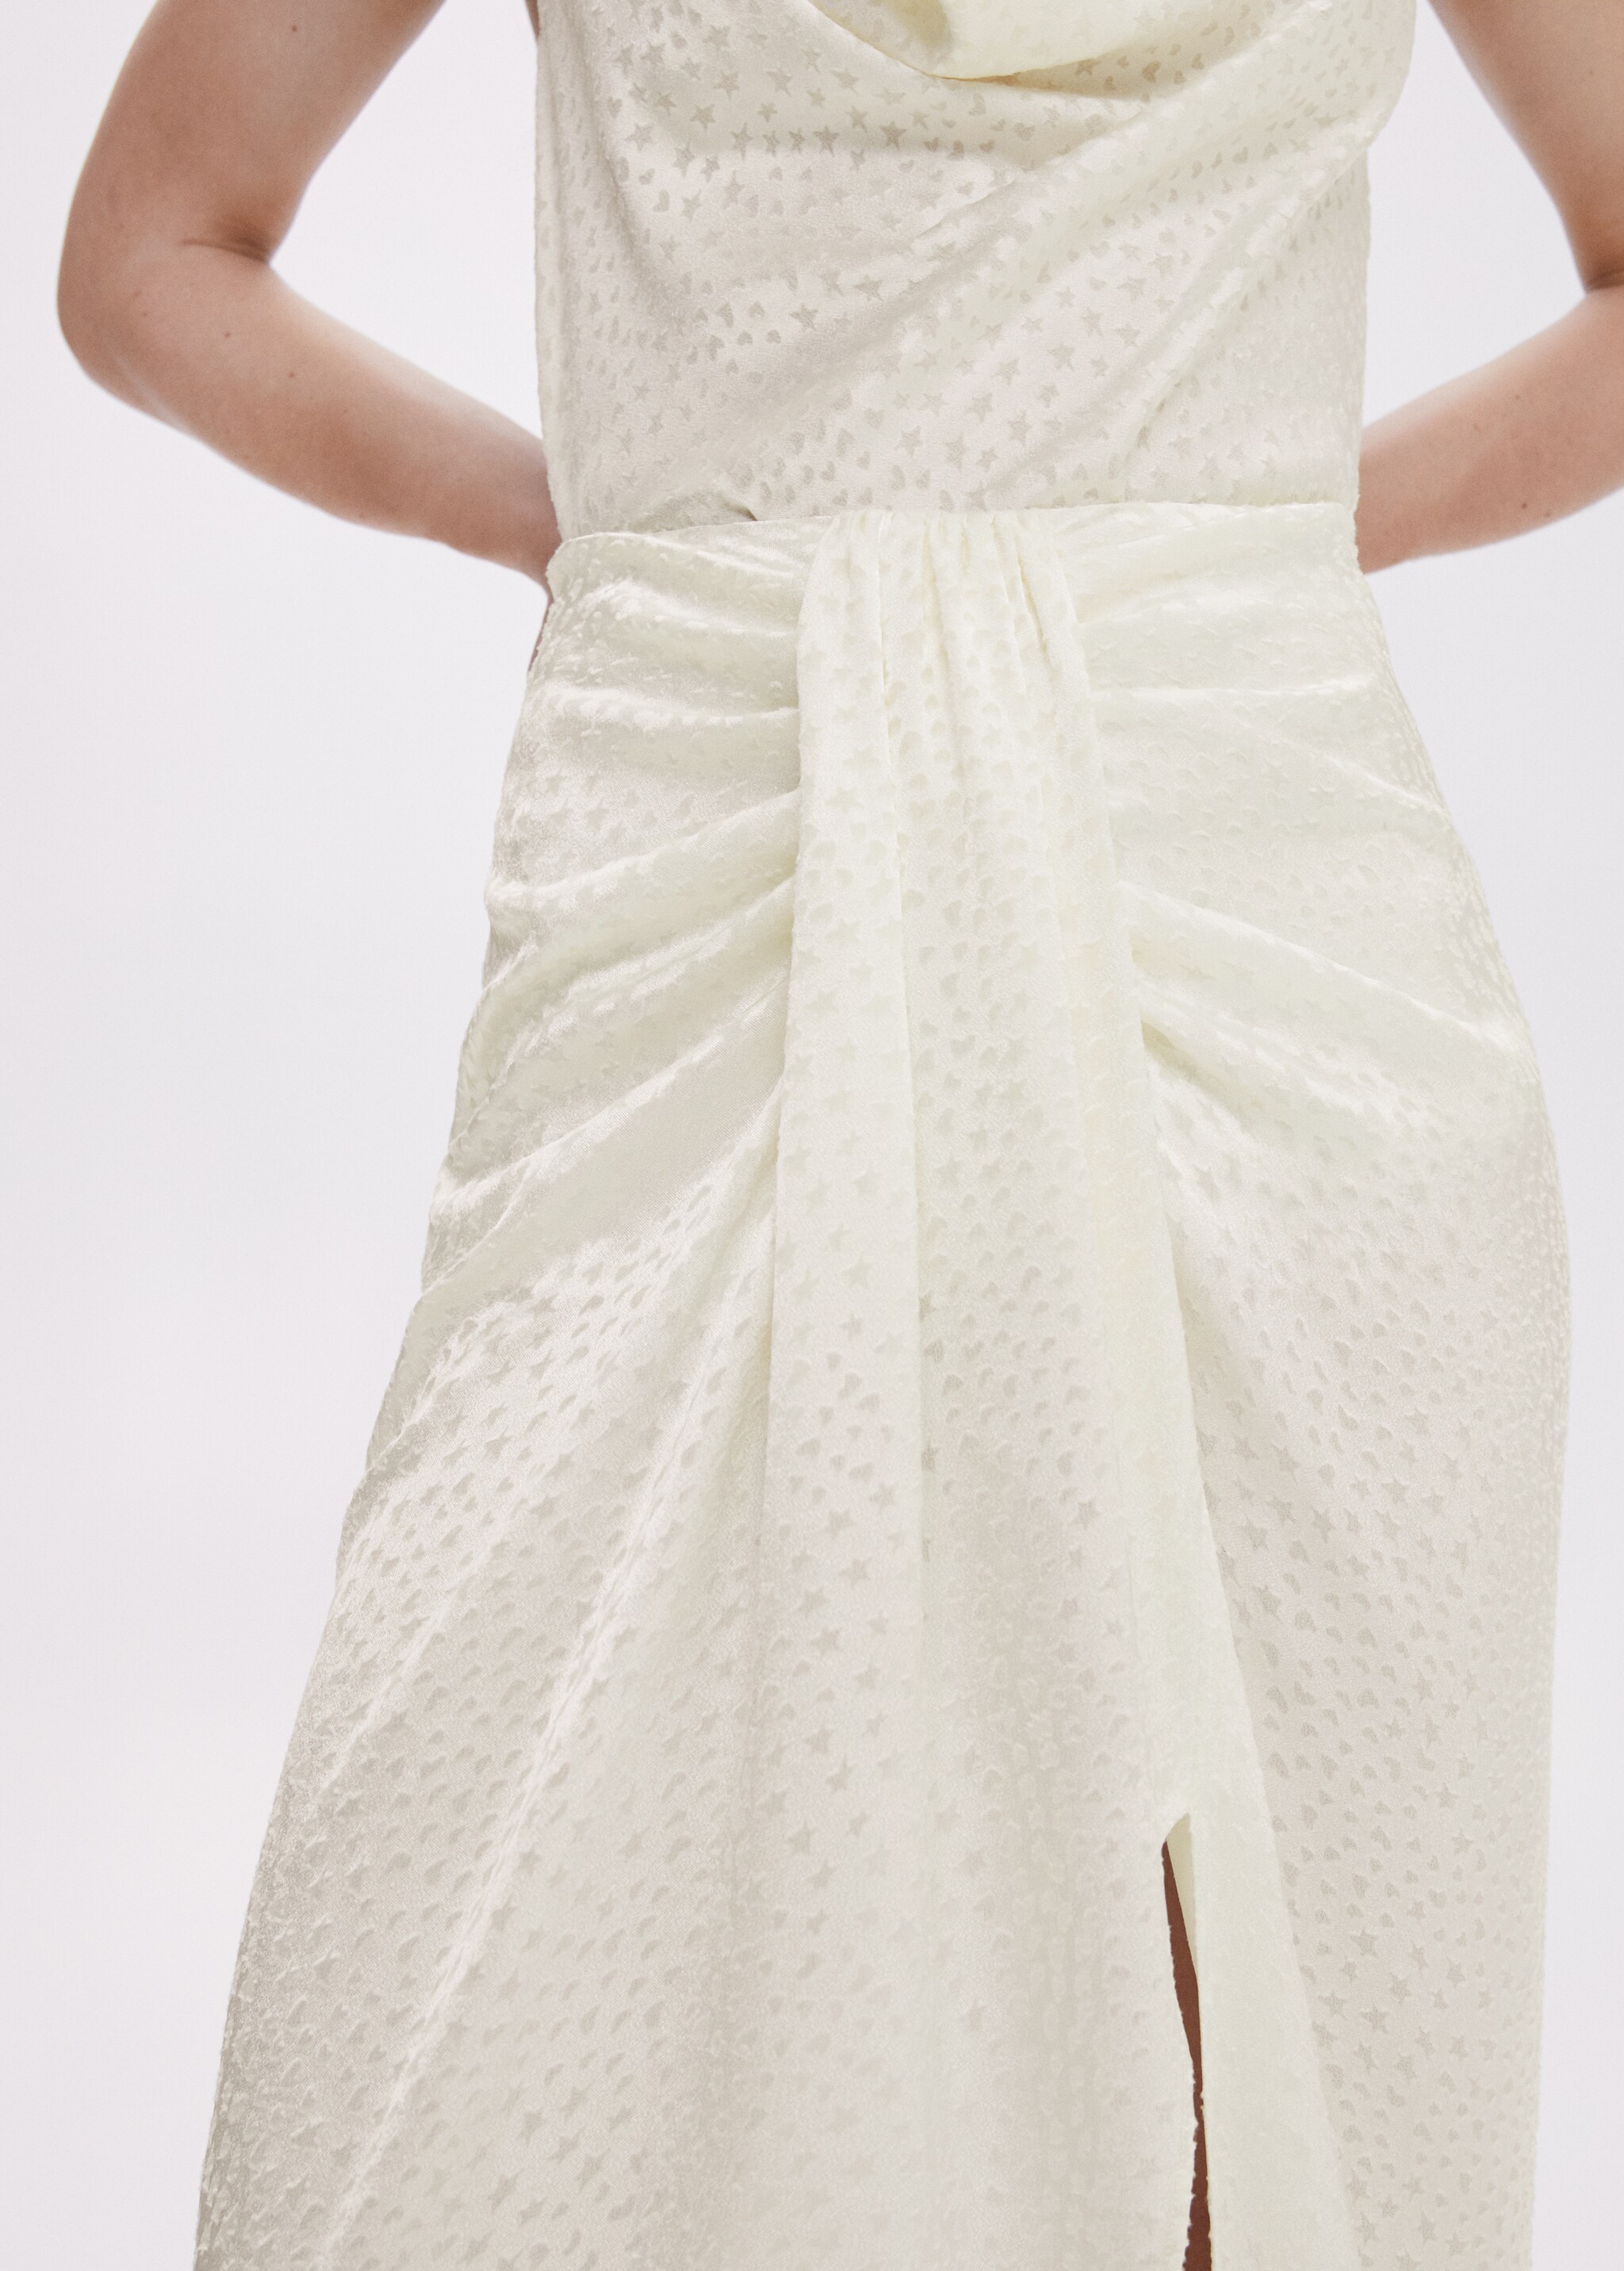 Knot jacquard skirt - Details of the article 6